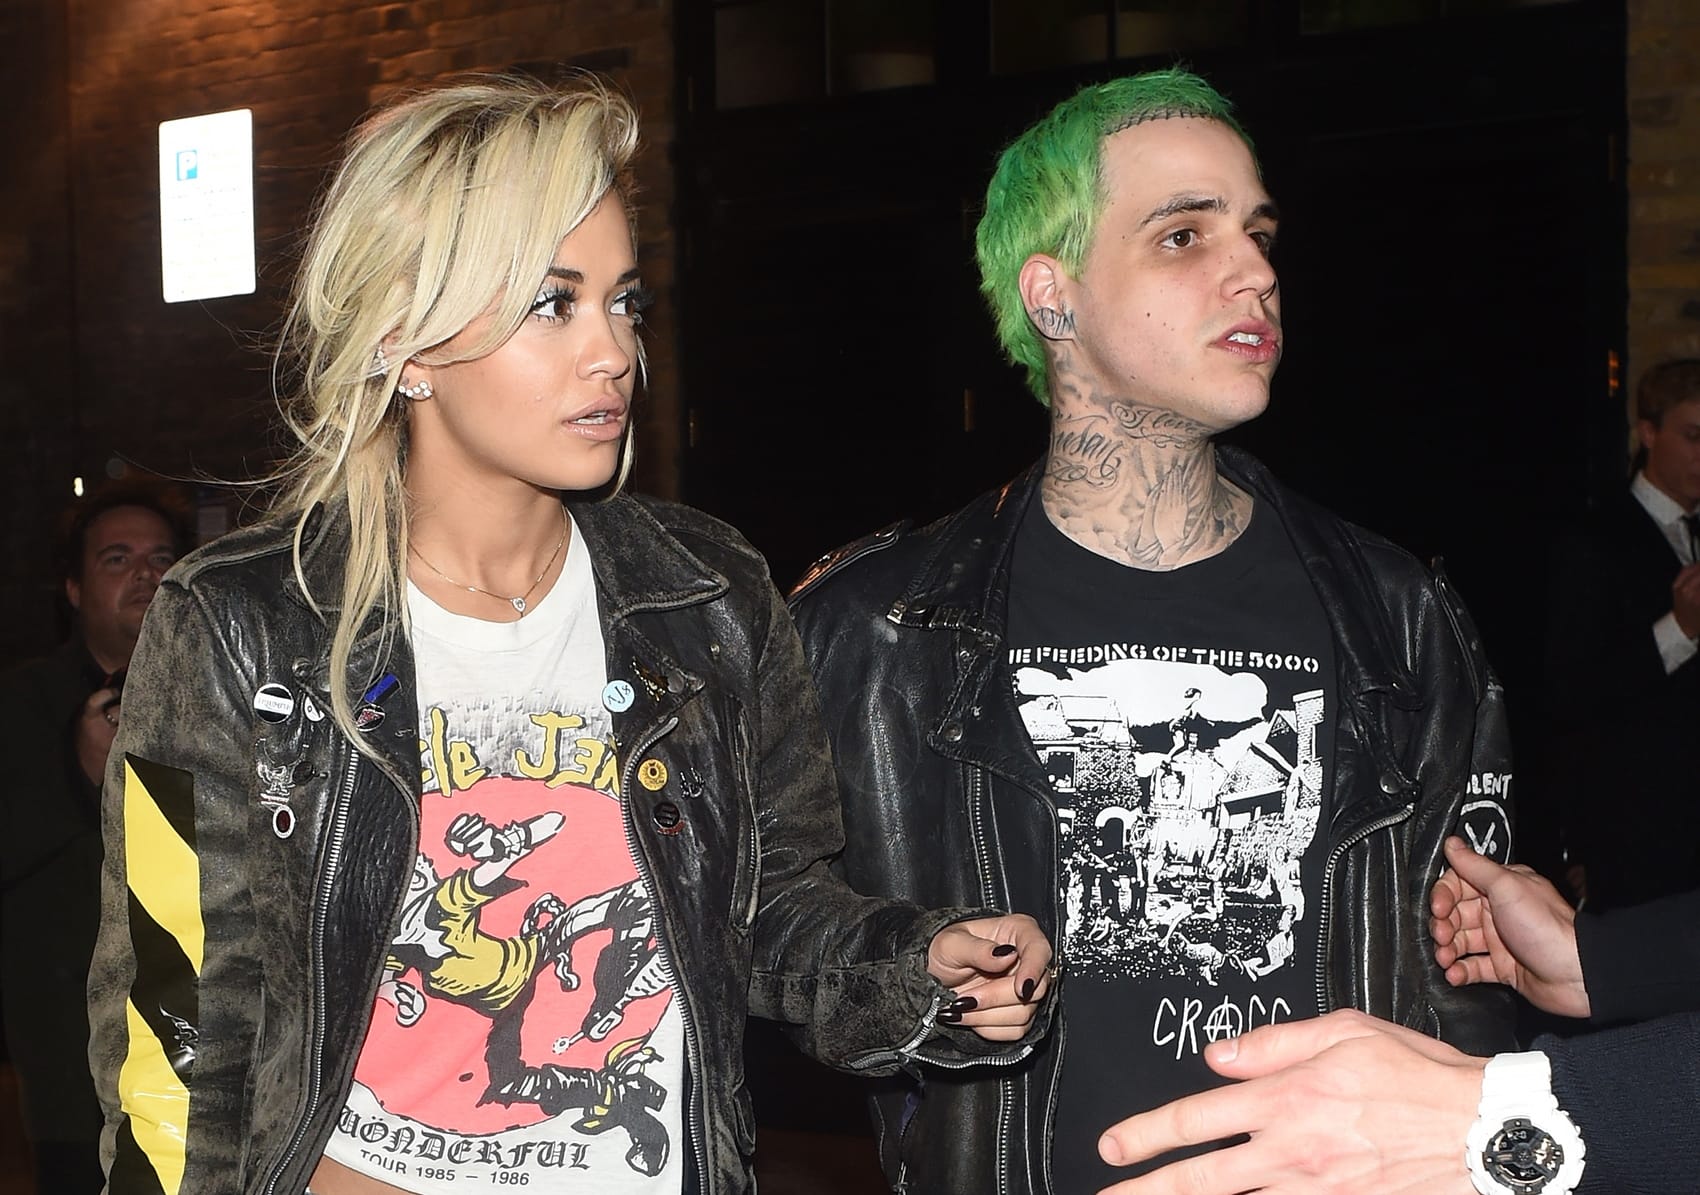 Richard "Ricky Hil" Hilfiger and Rita Ora began dating in the summer of 2014 and broke up a year later